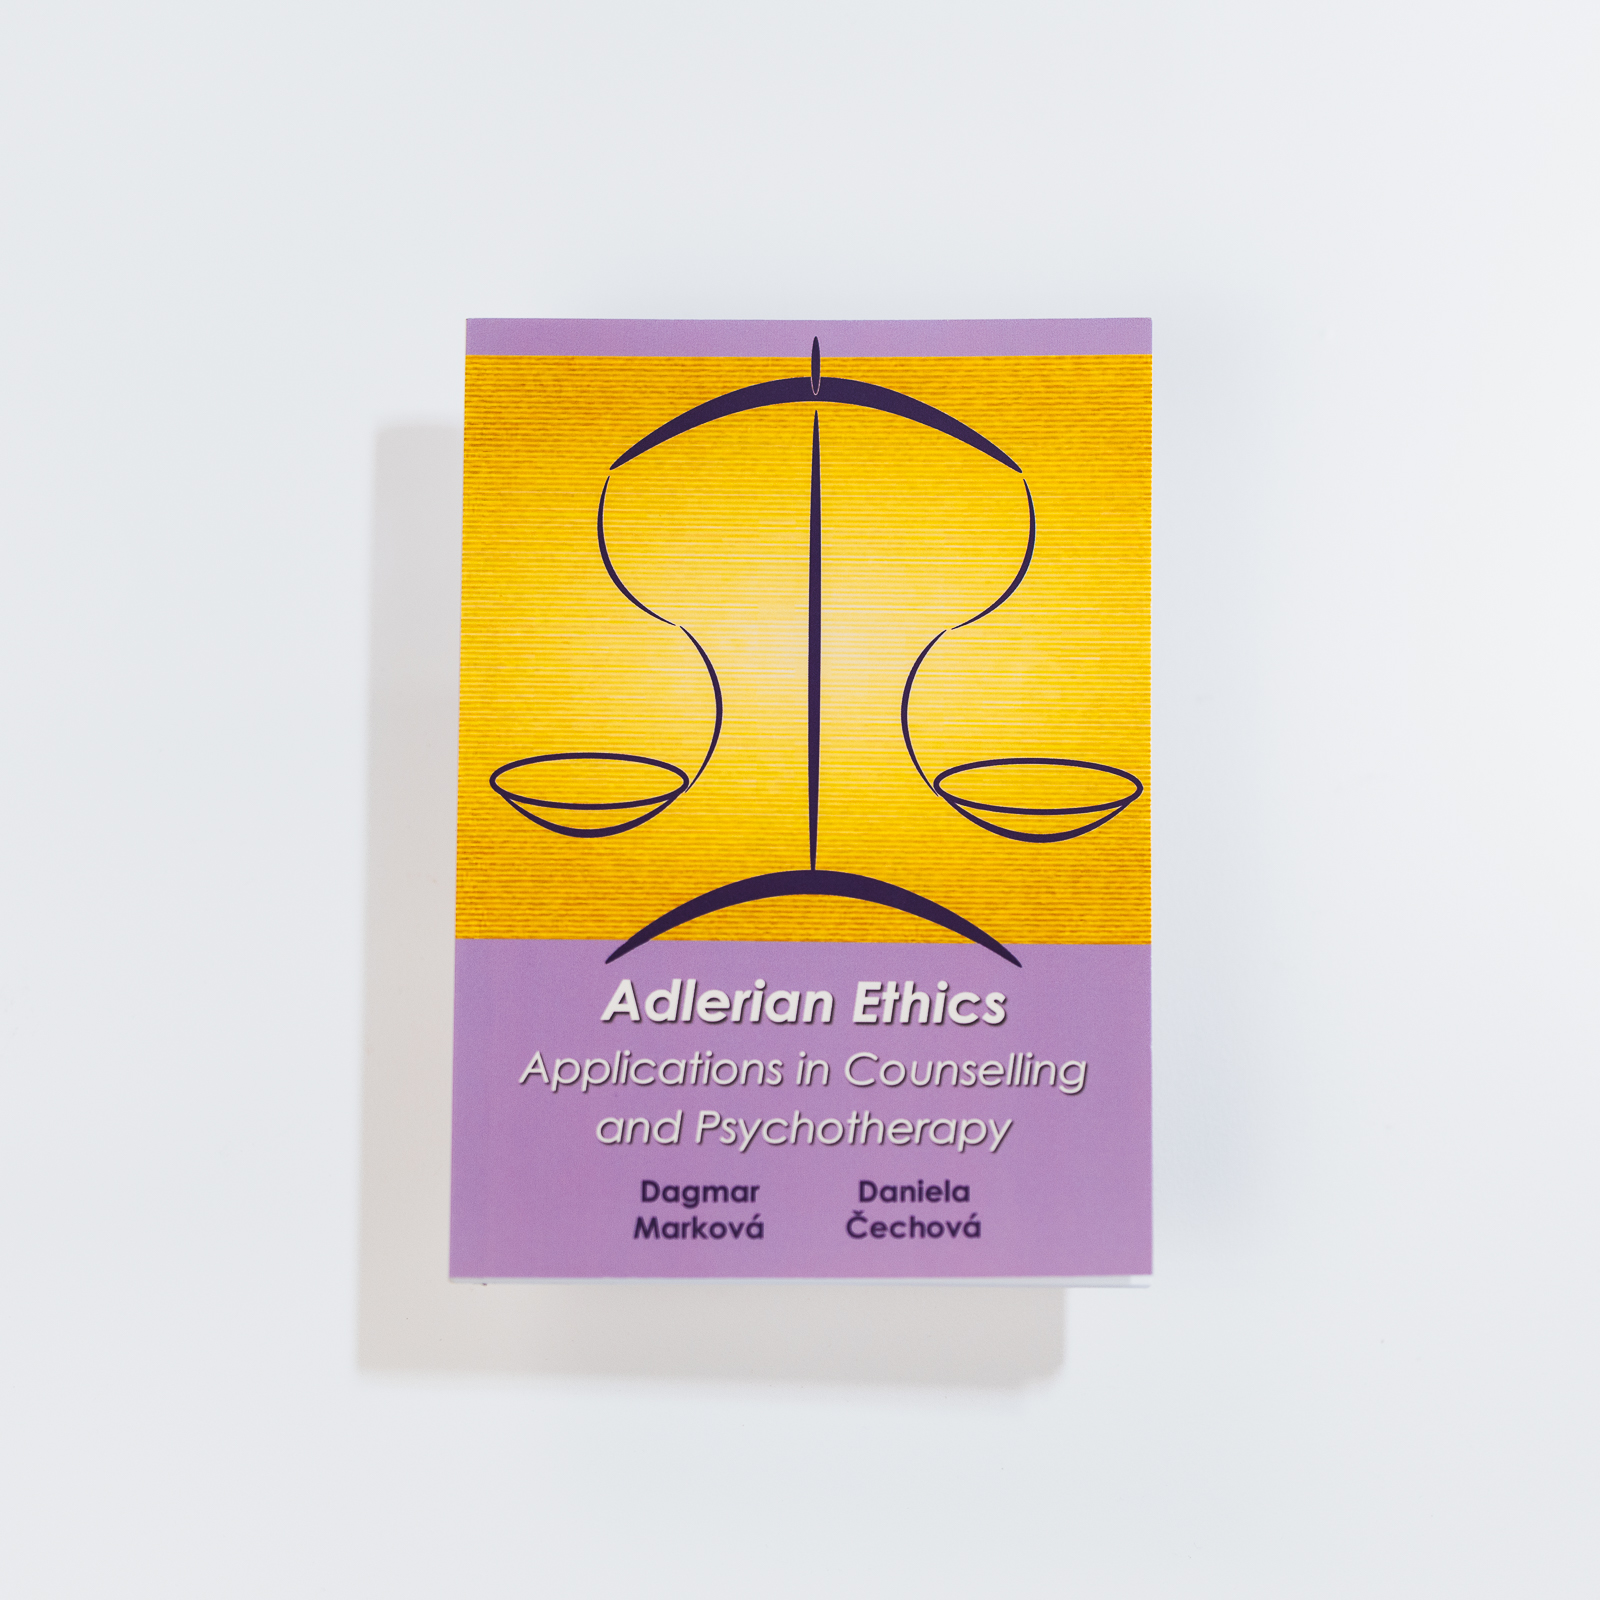 Book: Adlerian Ethics – Application in Counselling and Psychotherapy